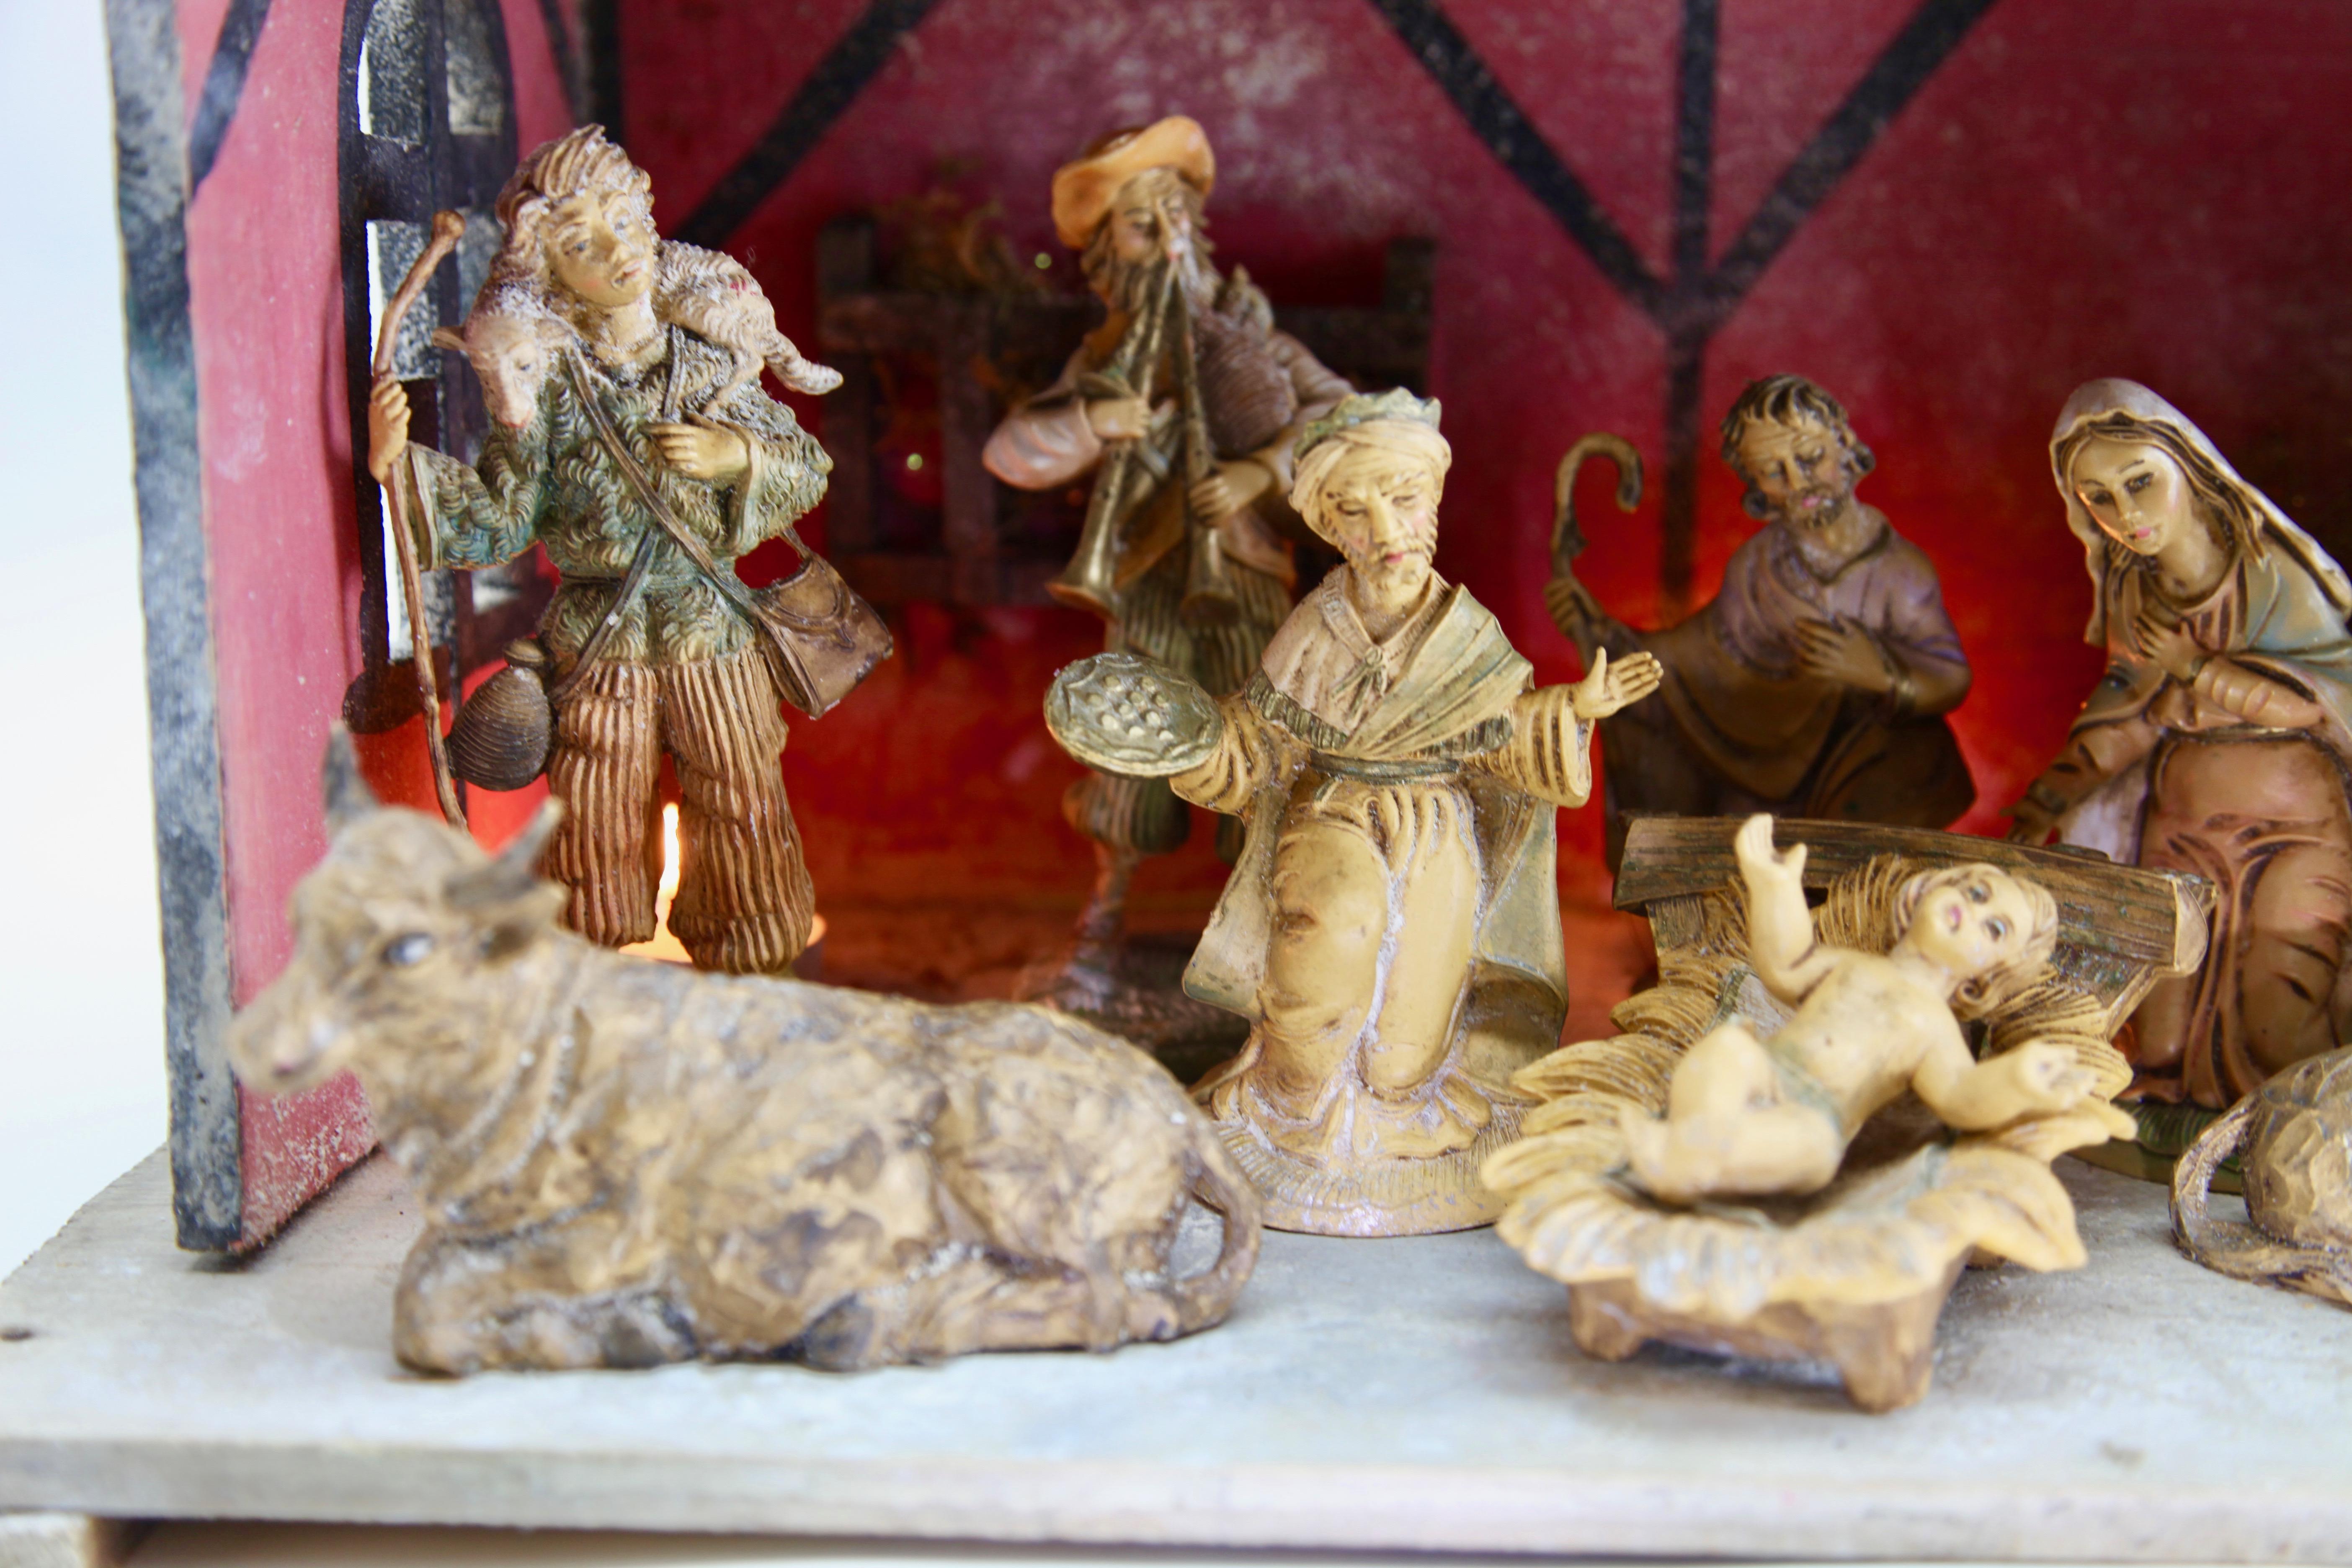 Molded Italian Christmas Nativity Scene with 10 Traditional Figures and Wooden Stable